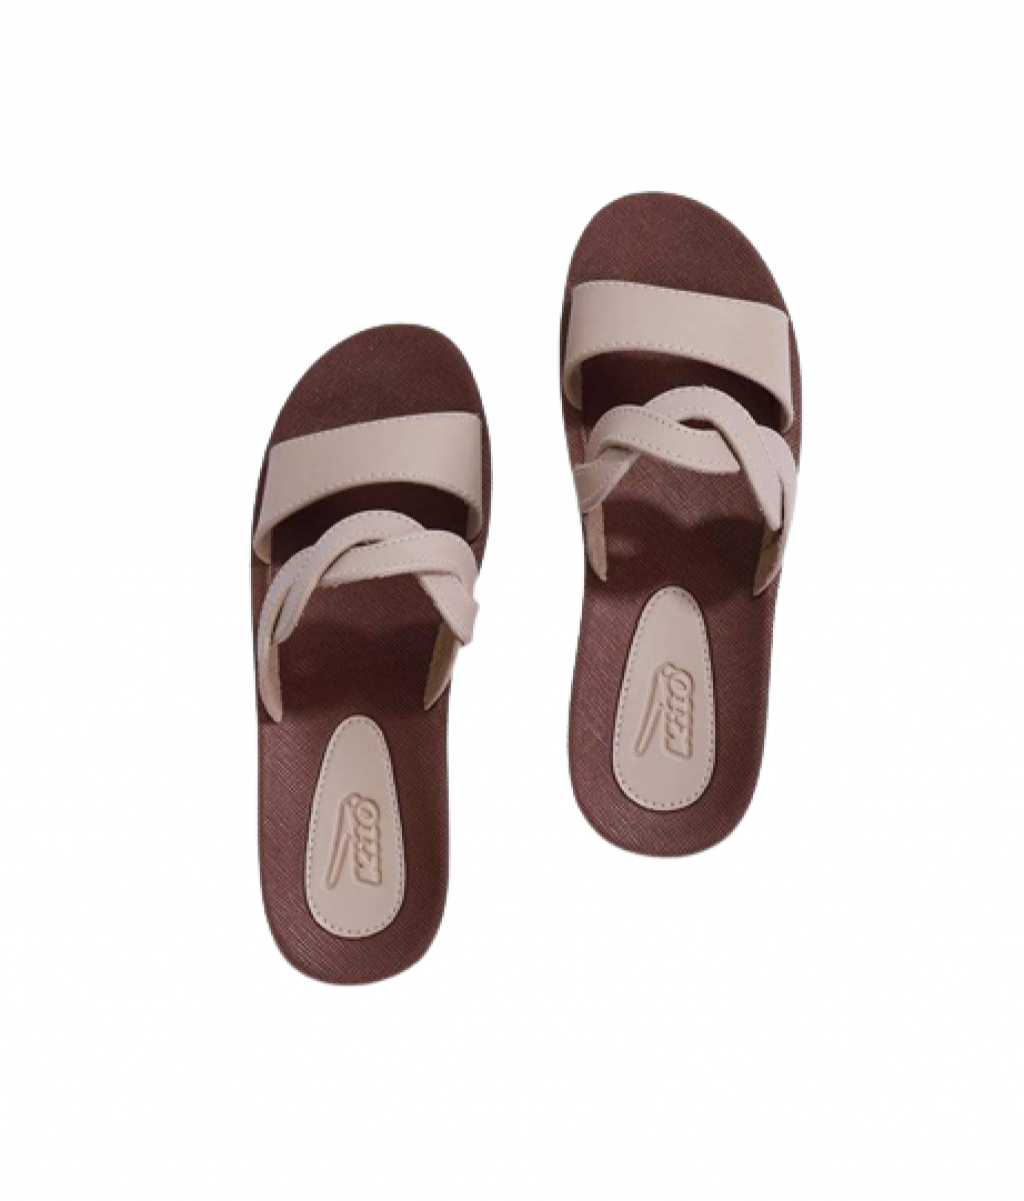 16615019550_kito-flipflop-slippers-kito-uw7050-29111655563437-removebg-preview.png